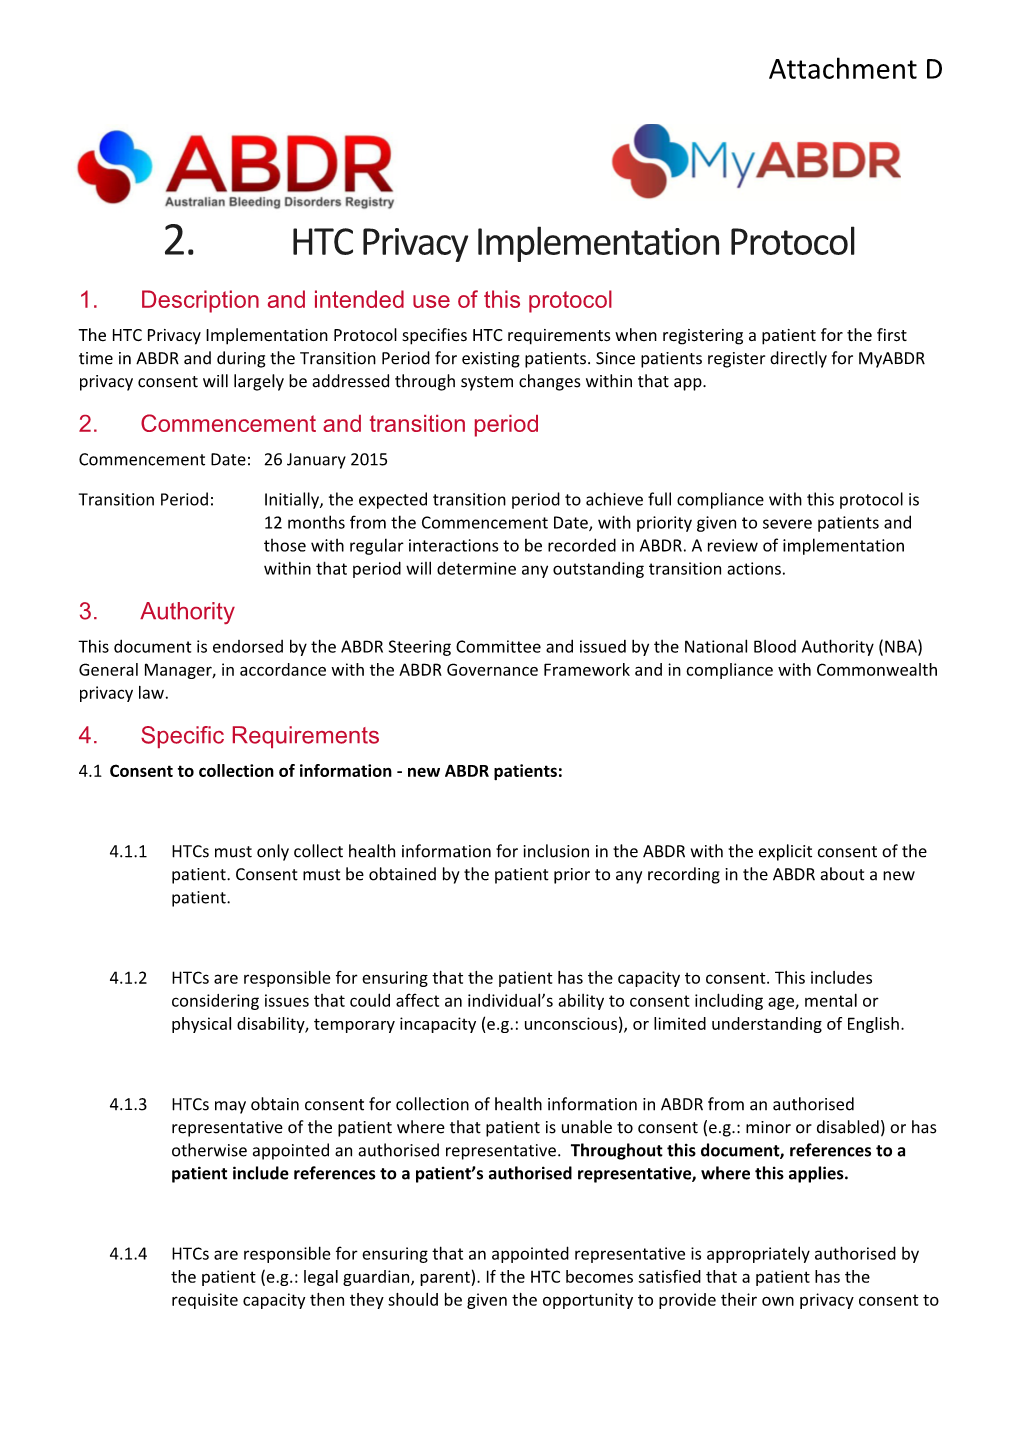 HTC Privacy Implementation Protocol